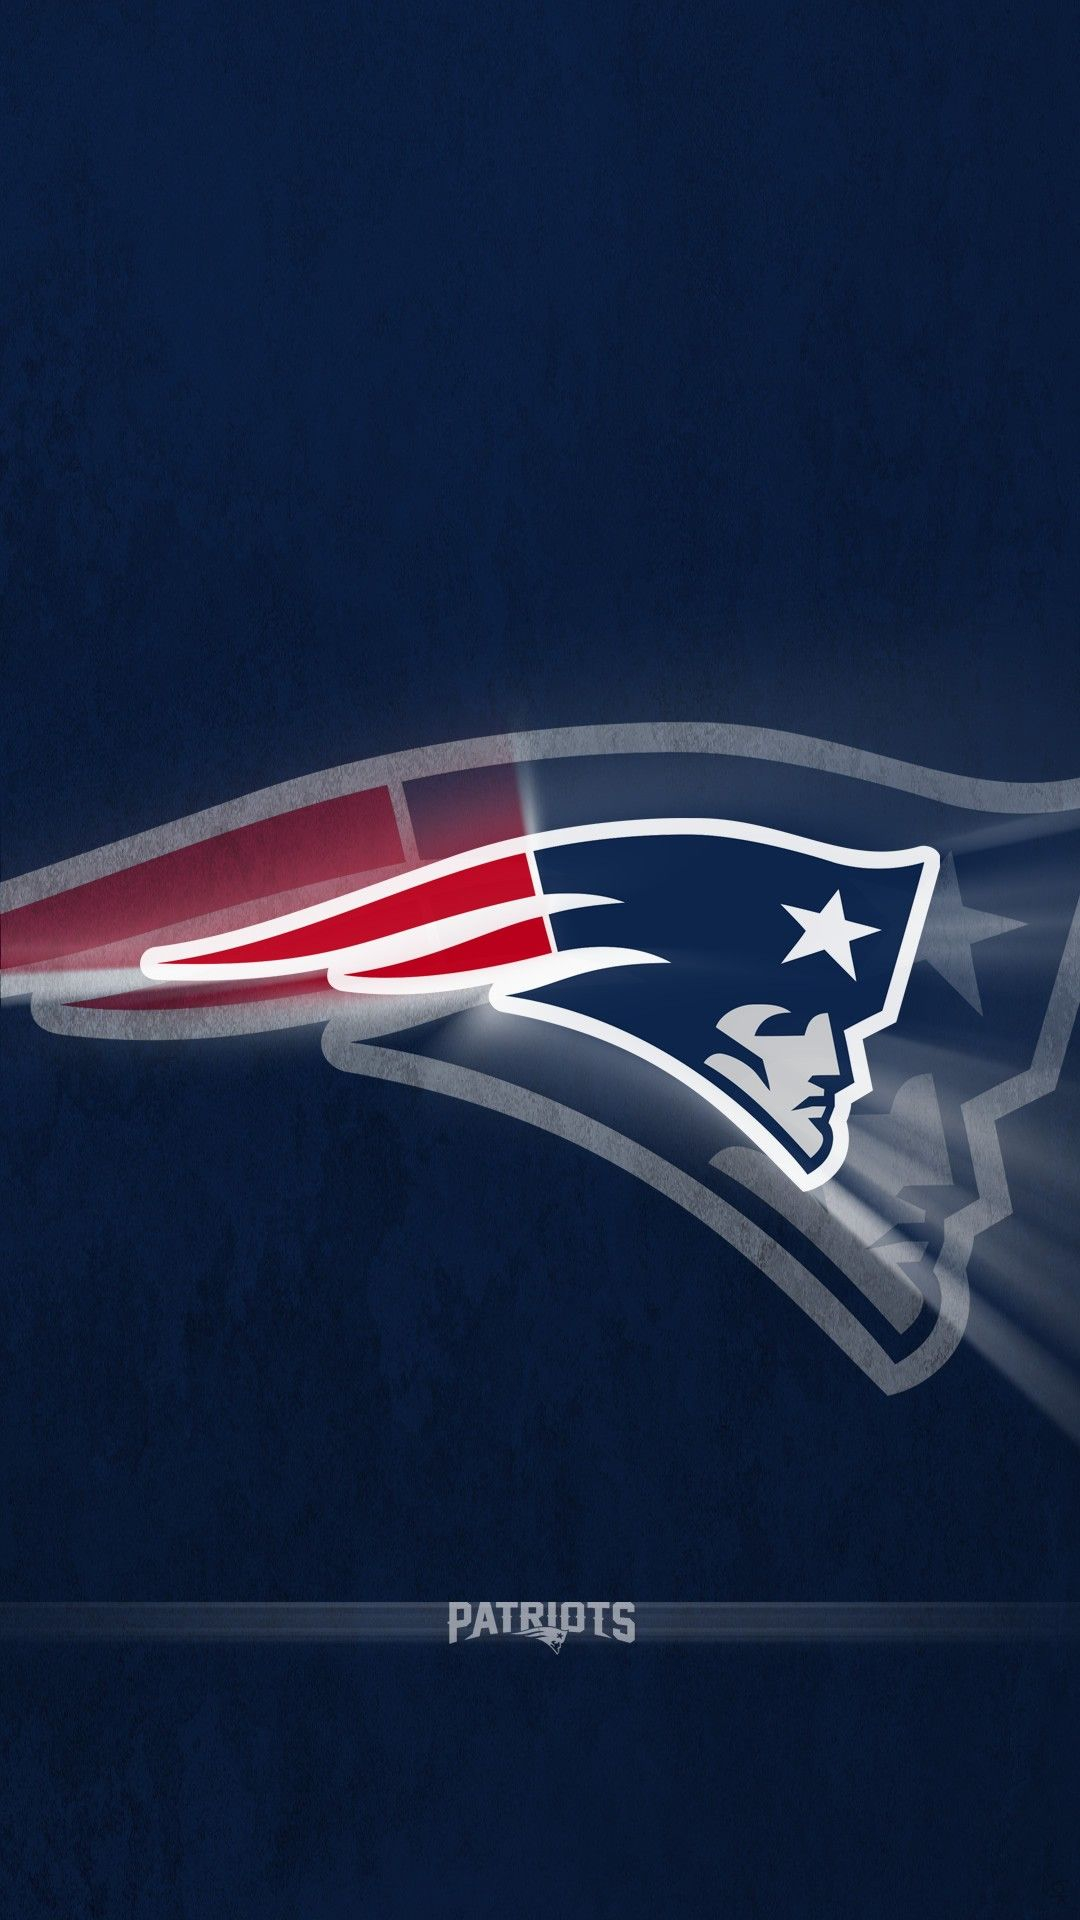 1080x1920 New England Patriots iPhone Backgrounds | Best NFL Wallpaper | New england patriots wallpaper, New england patriots, Nfl new england patriots